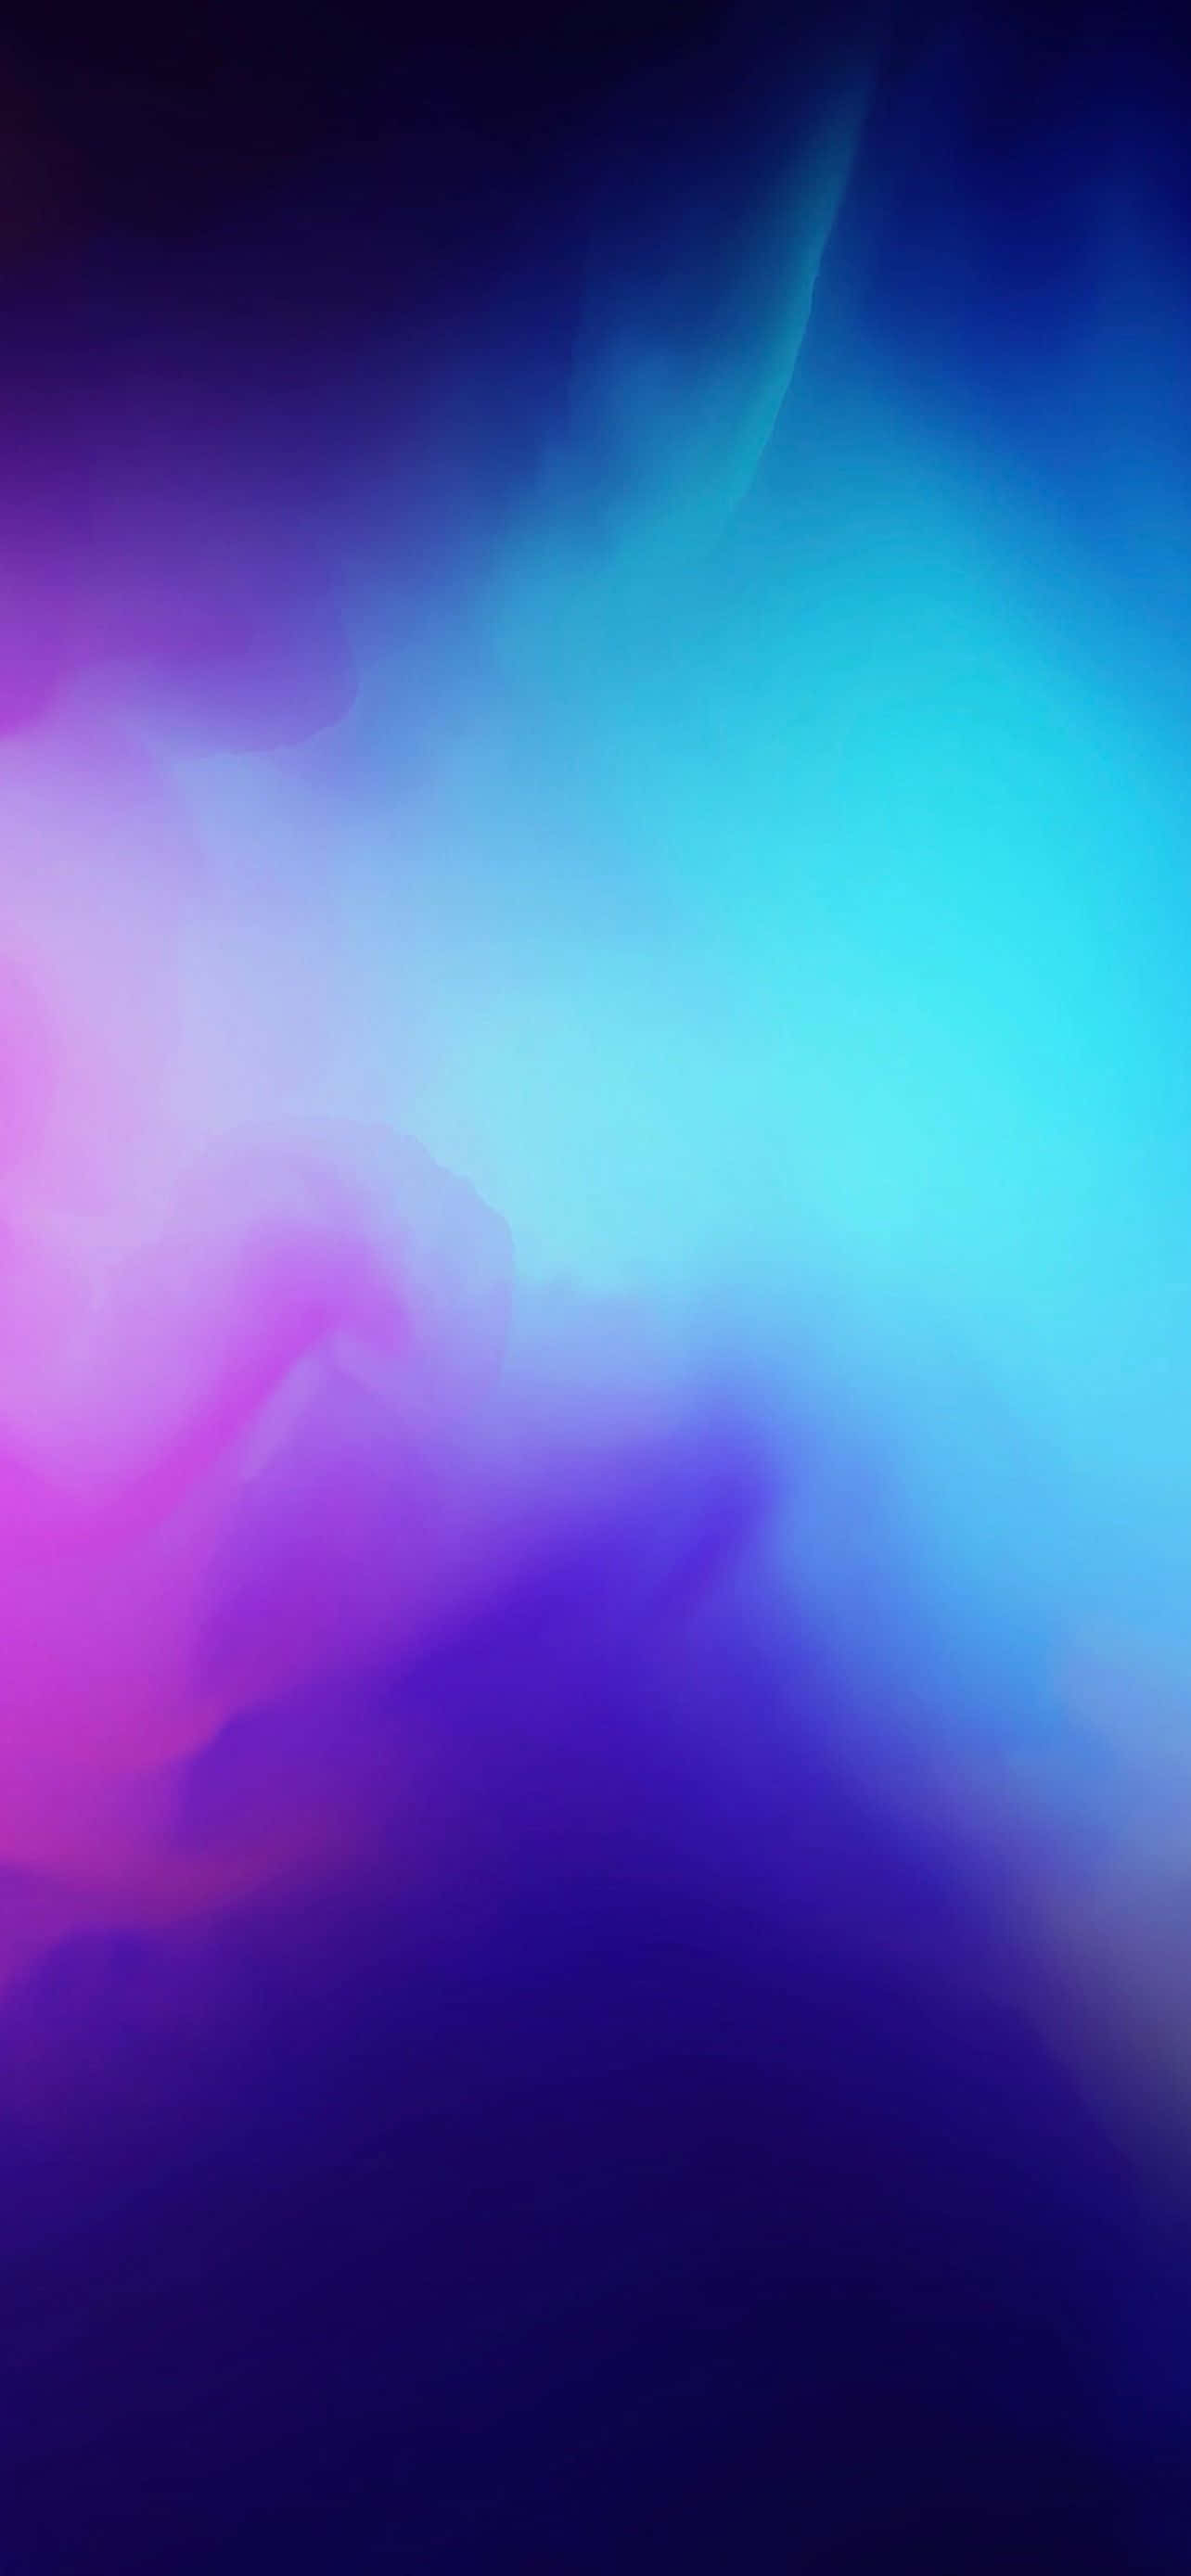 A Blue And Purple Background With A Blue And Purple Swirl